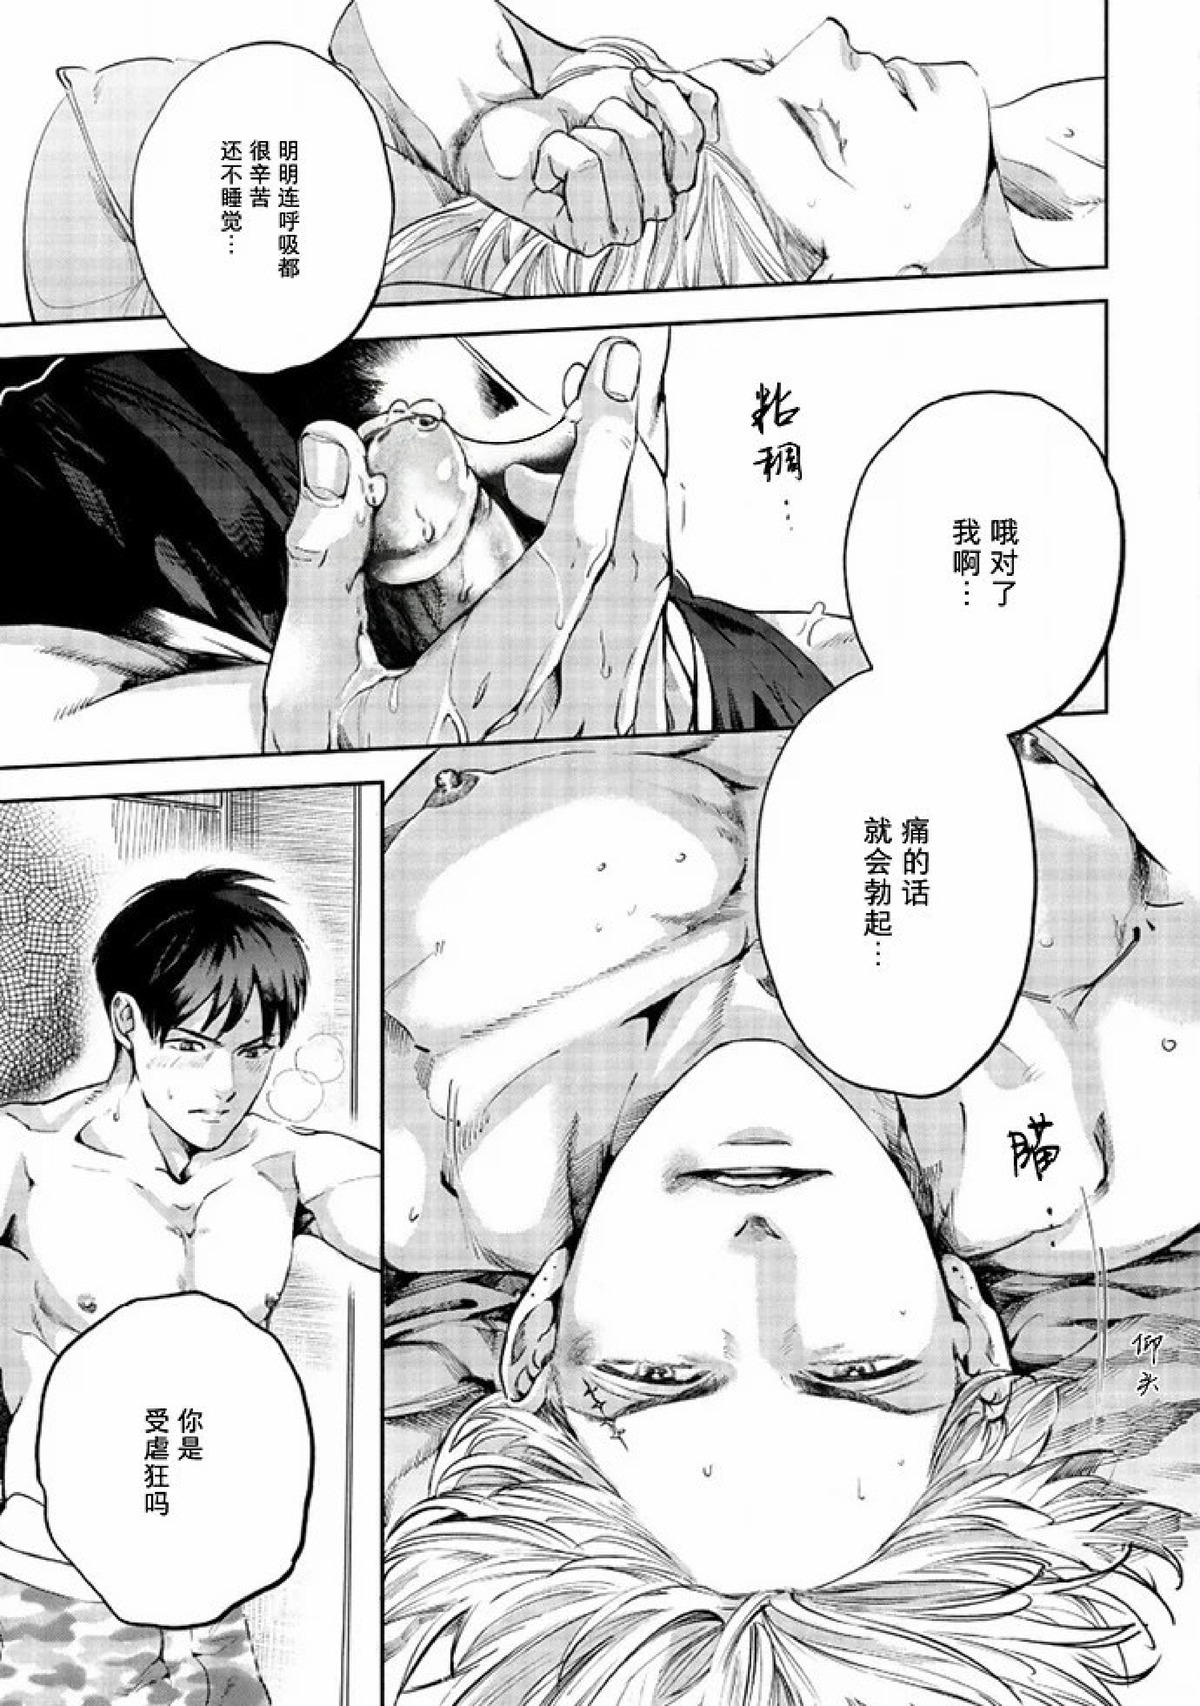 【Two sides of the same coin[腐漫]】漫画-（上卷01-02）章节漫画下拉式图片-87.jpg